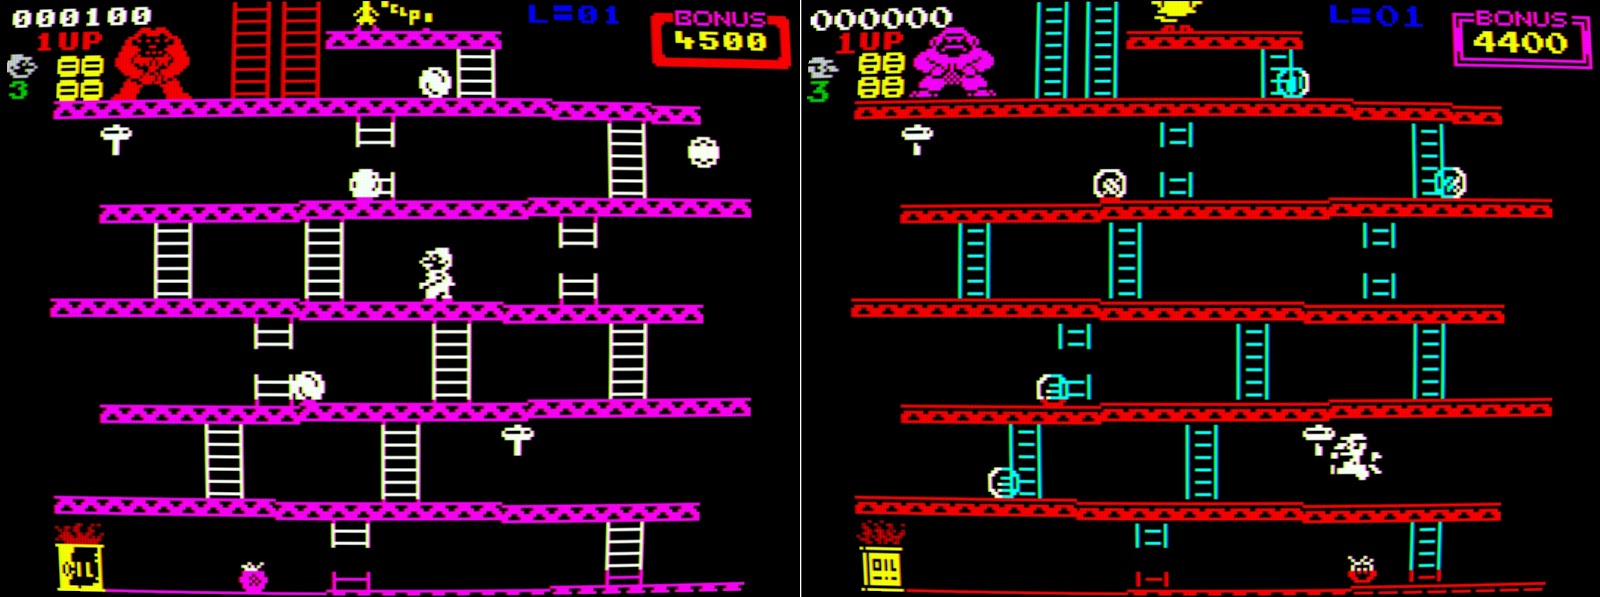 Indie Retro News Donkey Kong Arcade Edition The Definite Speccy Mod Of Donkey Kong For The Zx Spectrum